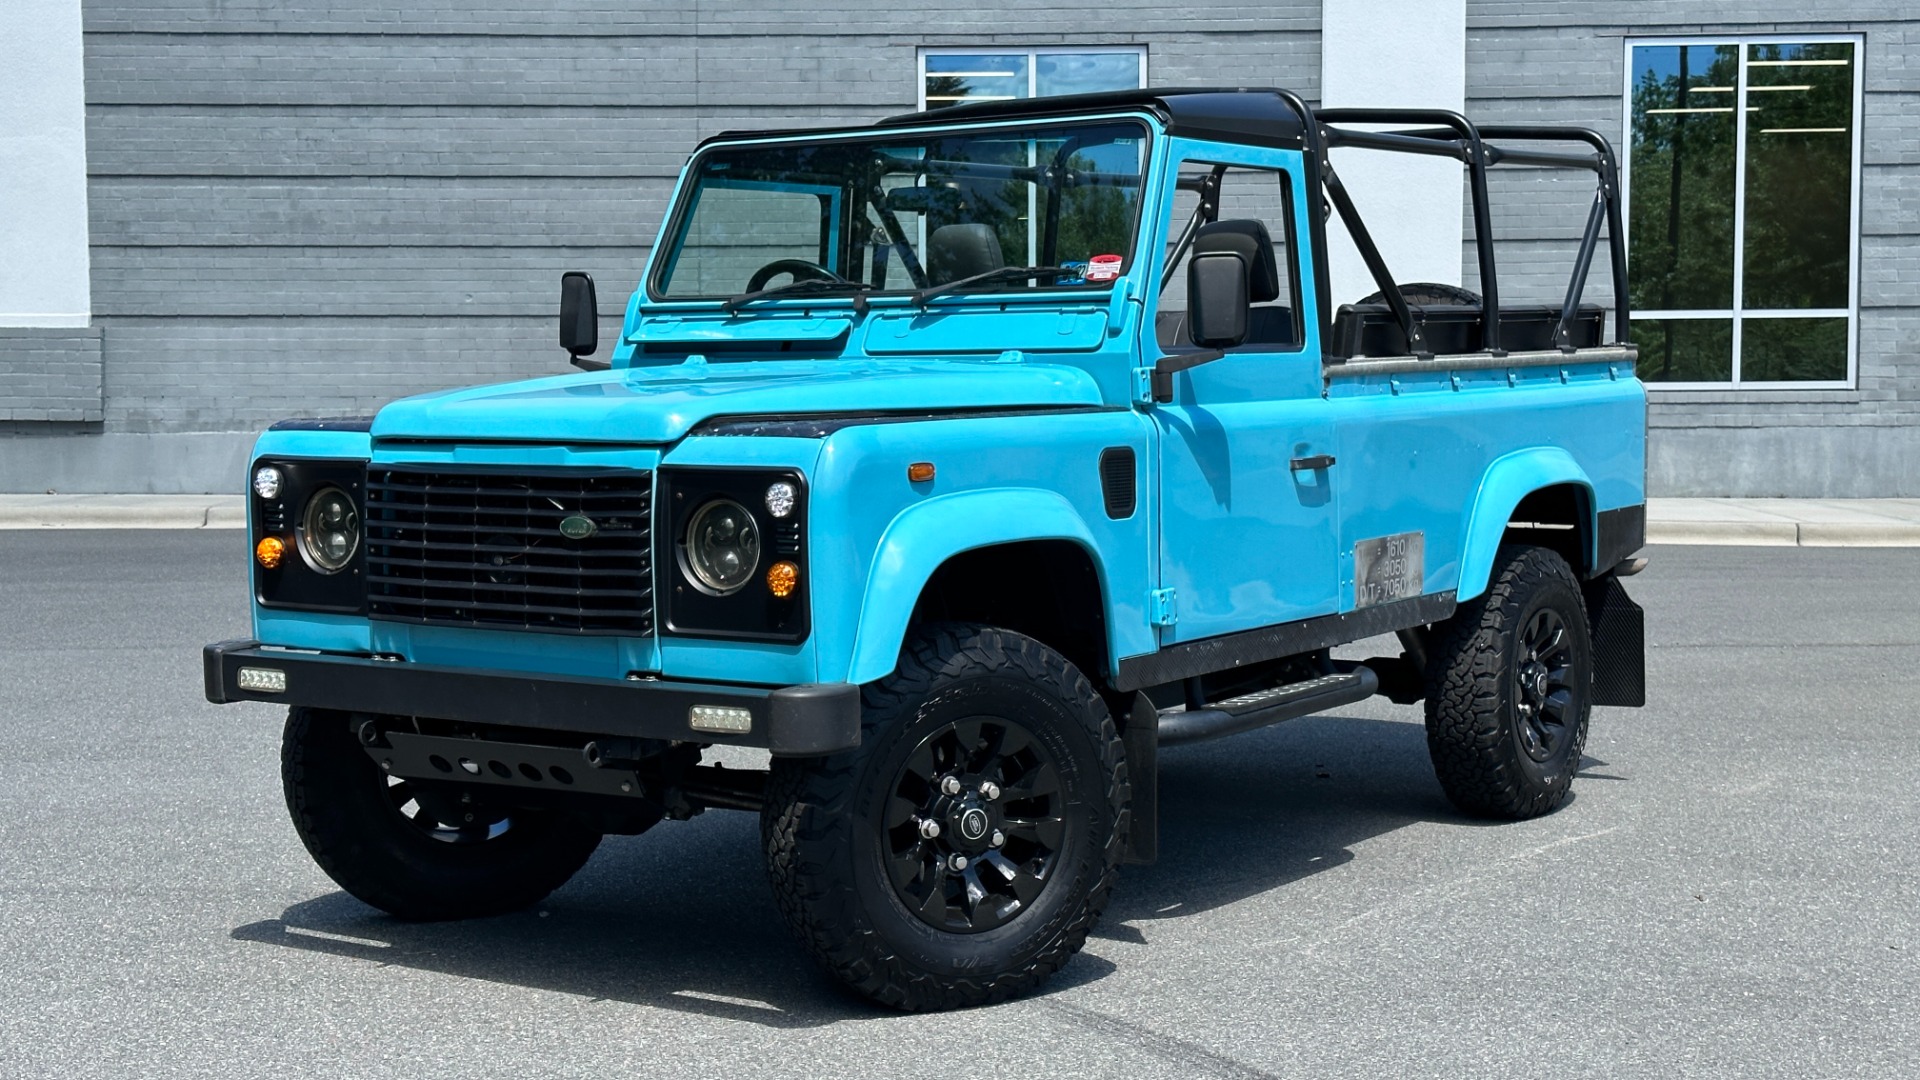 Used 1994 Land Rover Defender 110 CUSTOM BUILD / REBUILT POWERTRAIN / TDI300 DIESEL / 5SPD / BENCH SEATS for sale $81,995 at Formula Imports in Charlotte NC 28227 1